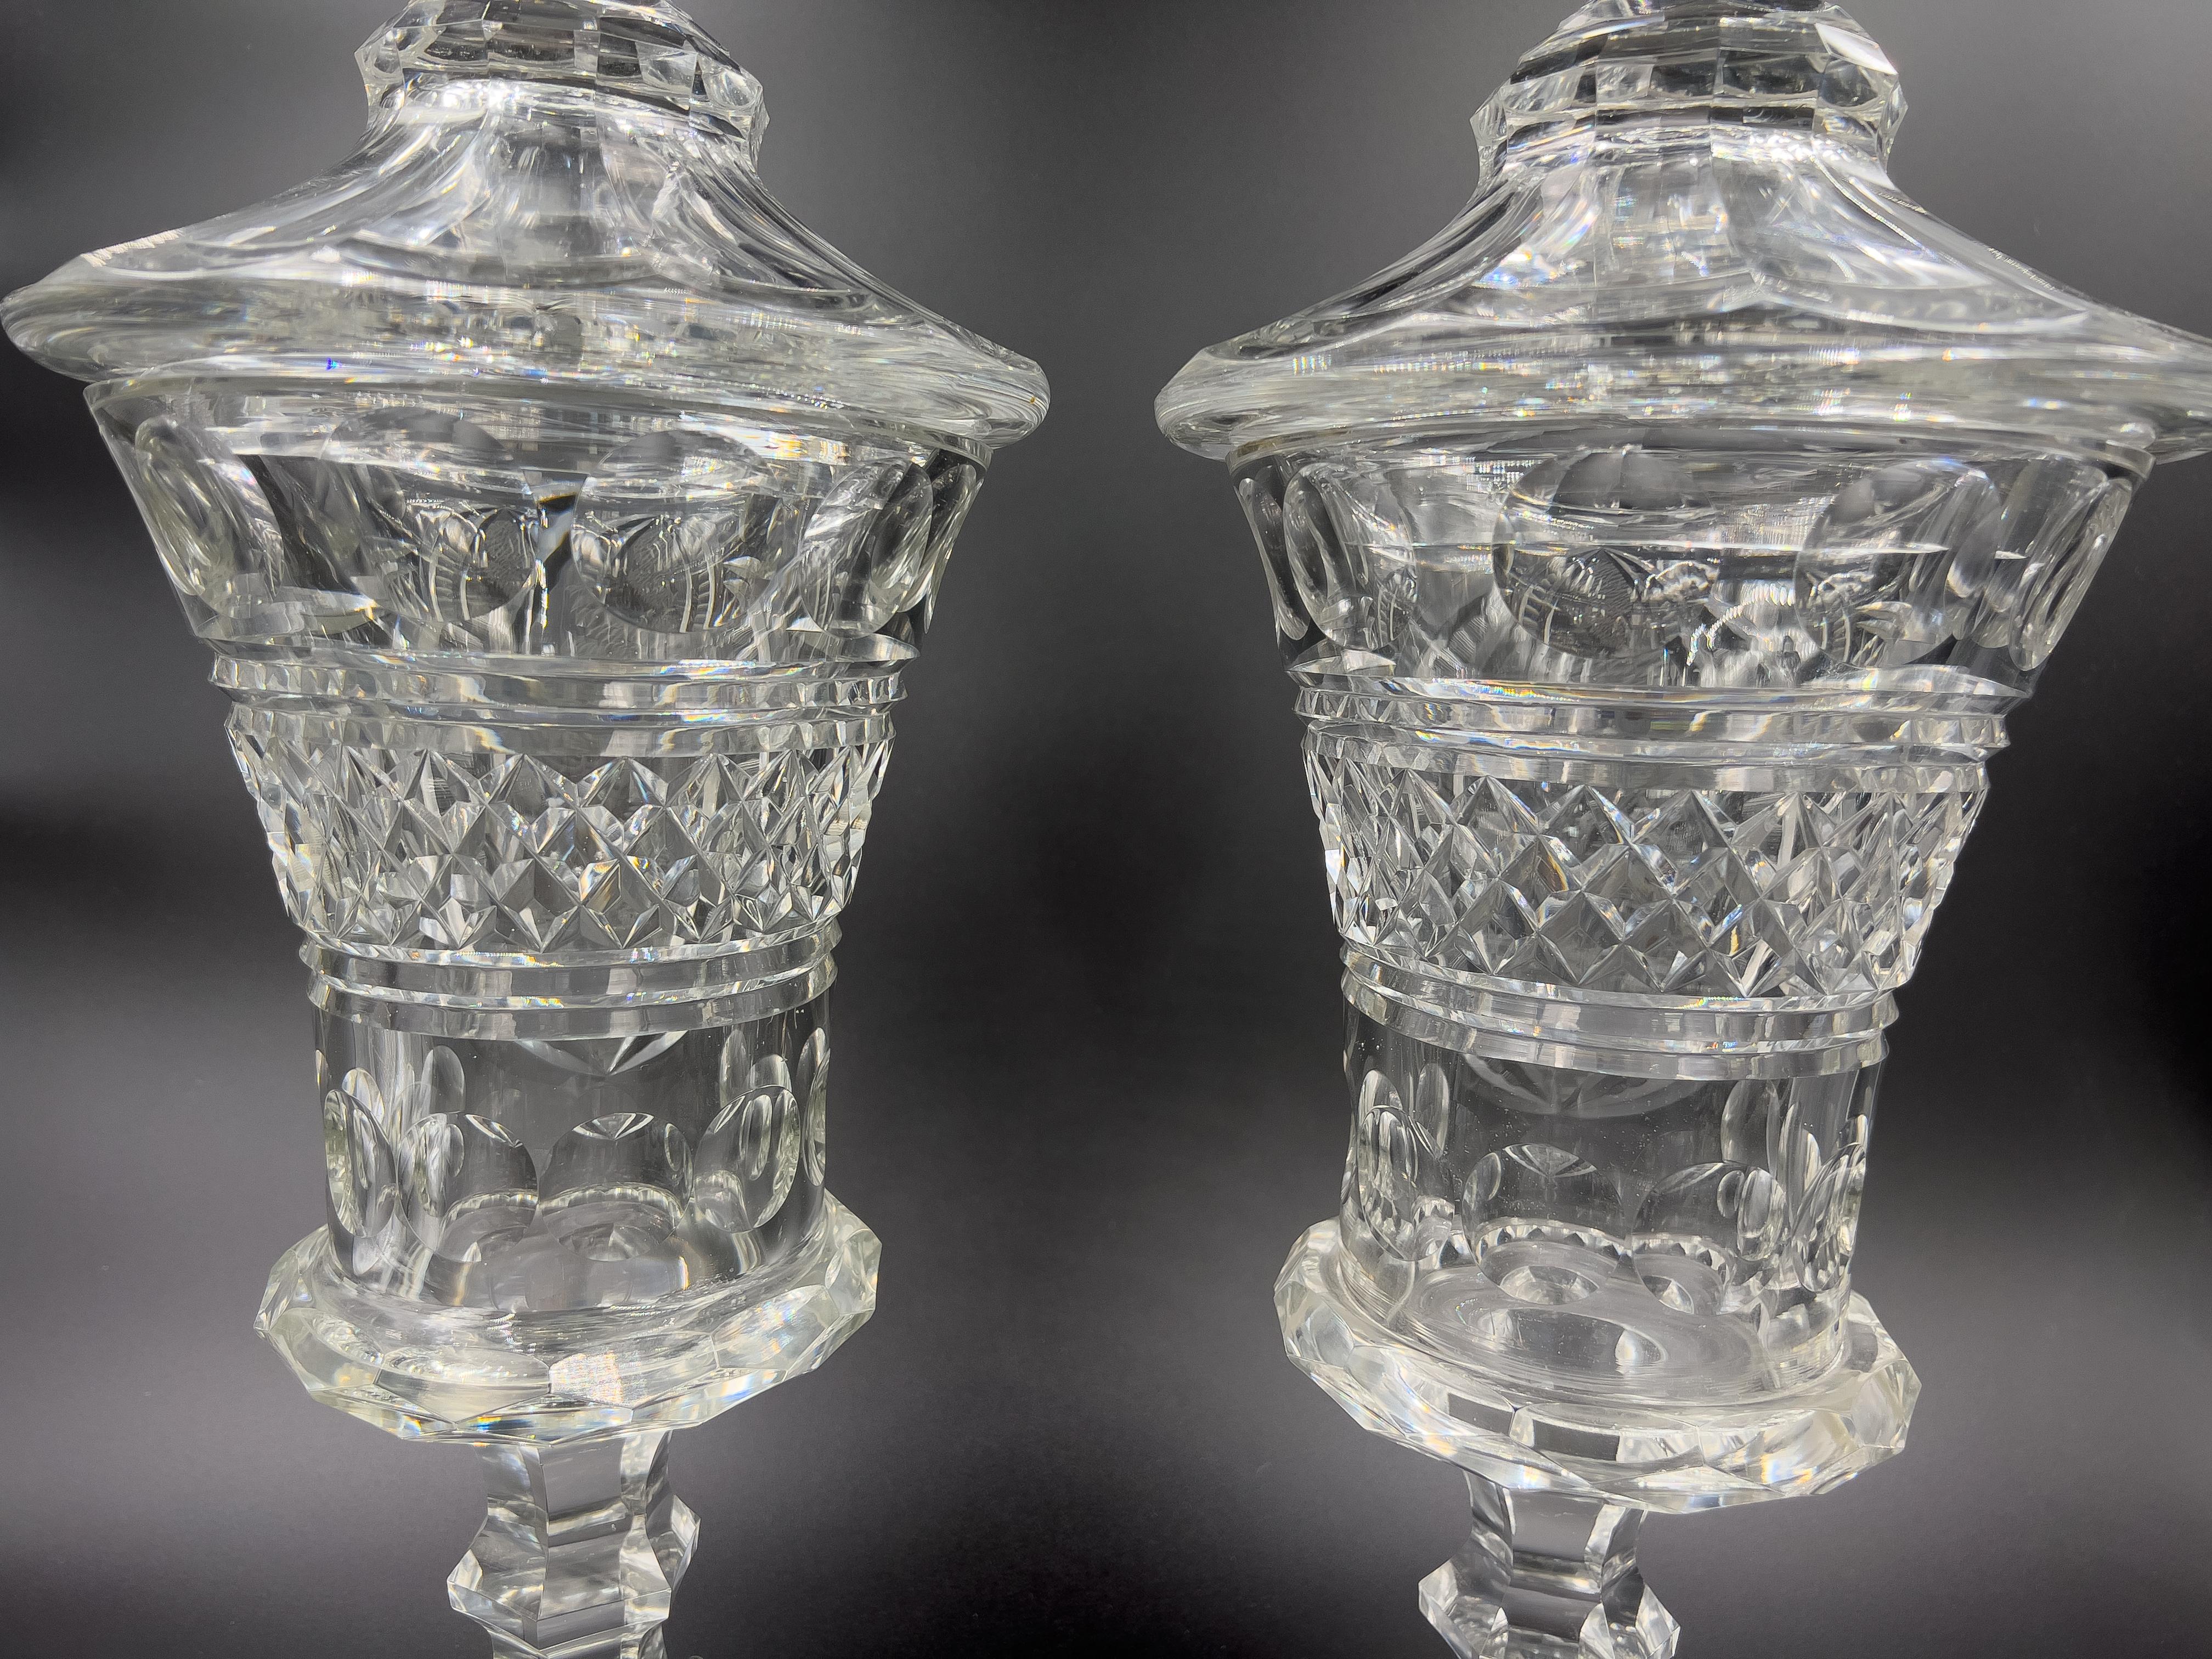 Fine Pair of Bohemian Cut and Etched Lidded Glass Vases, Late 19th/Early 20th  For Sale 2